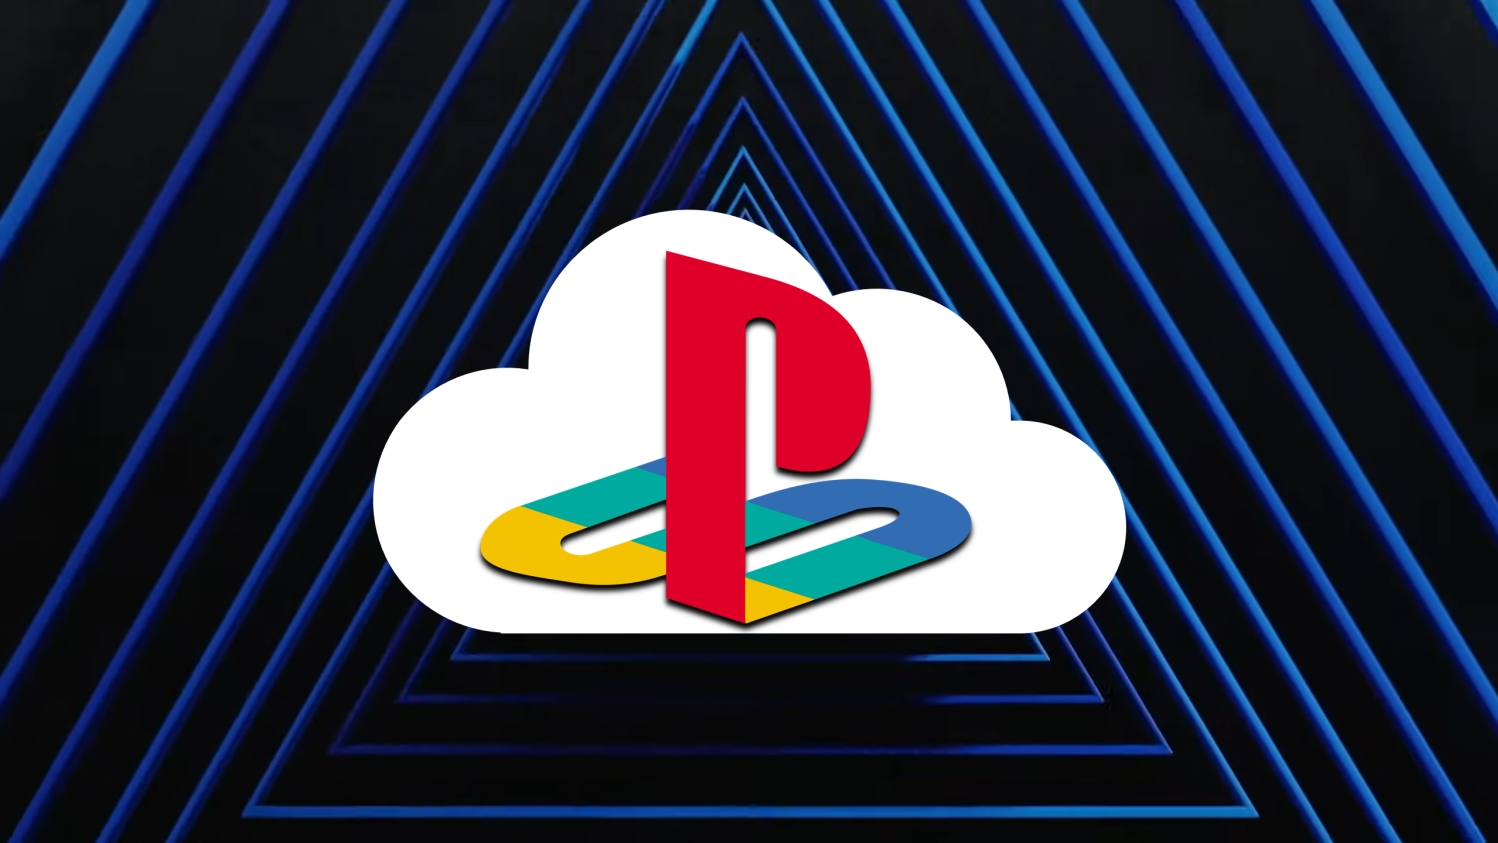 PS5 cloud streaming launches this month for PlayStation Plus